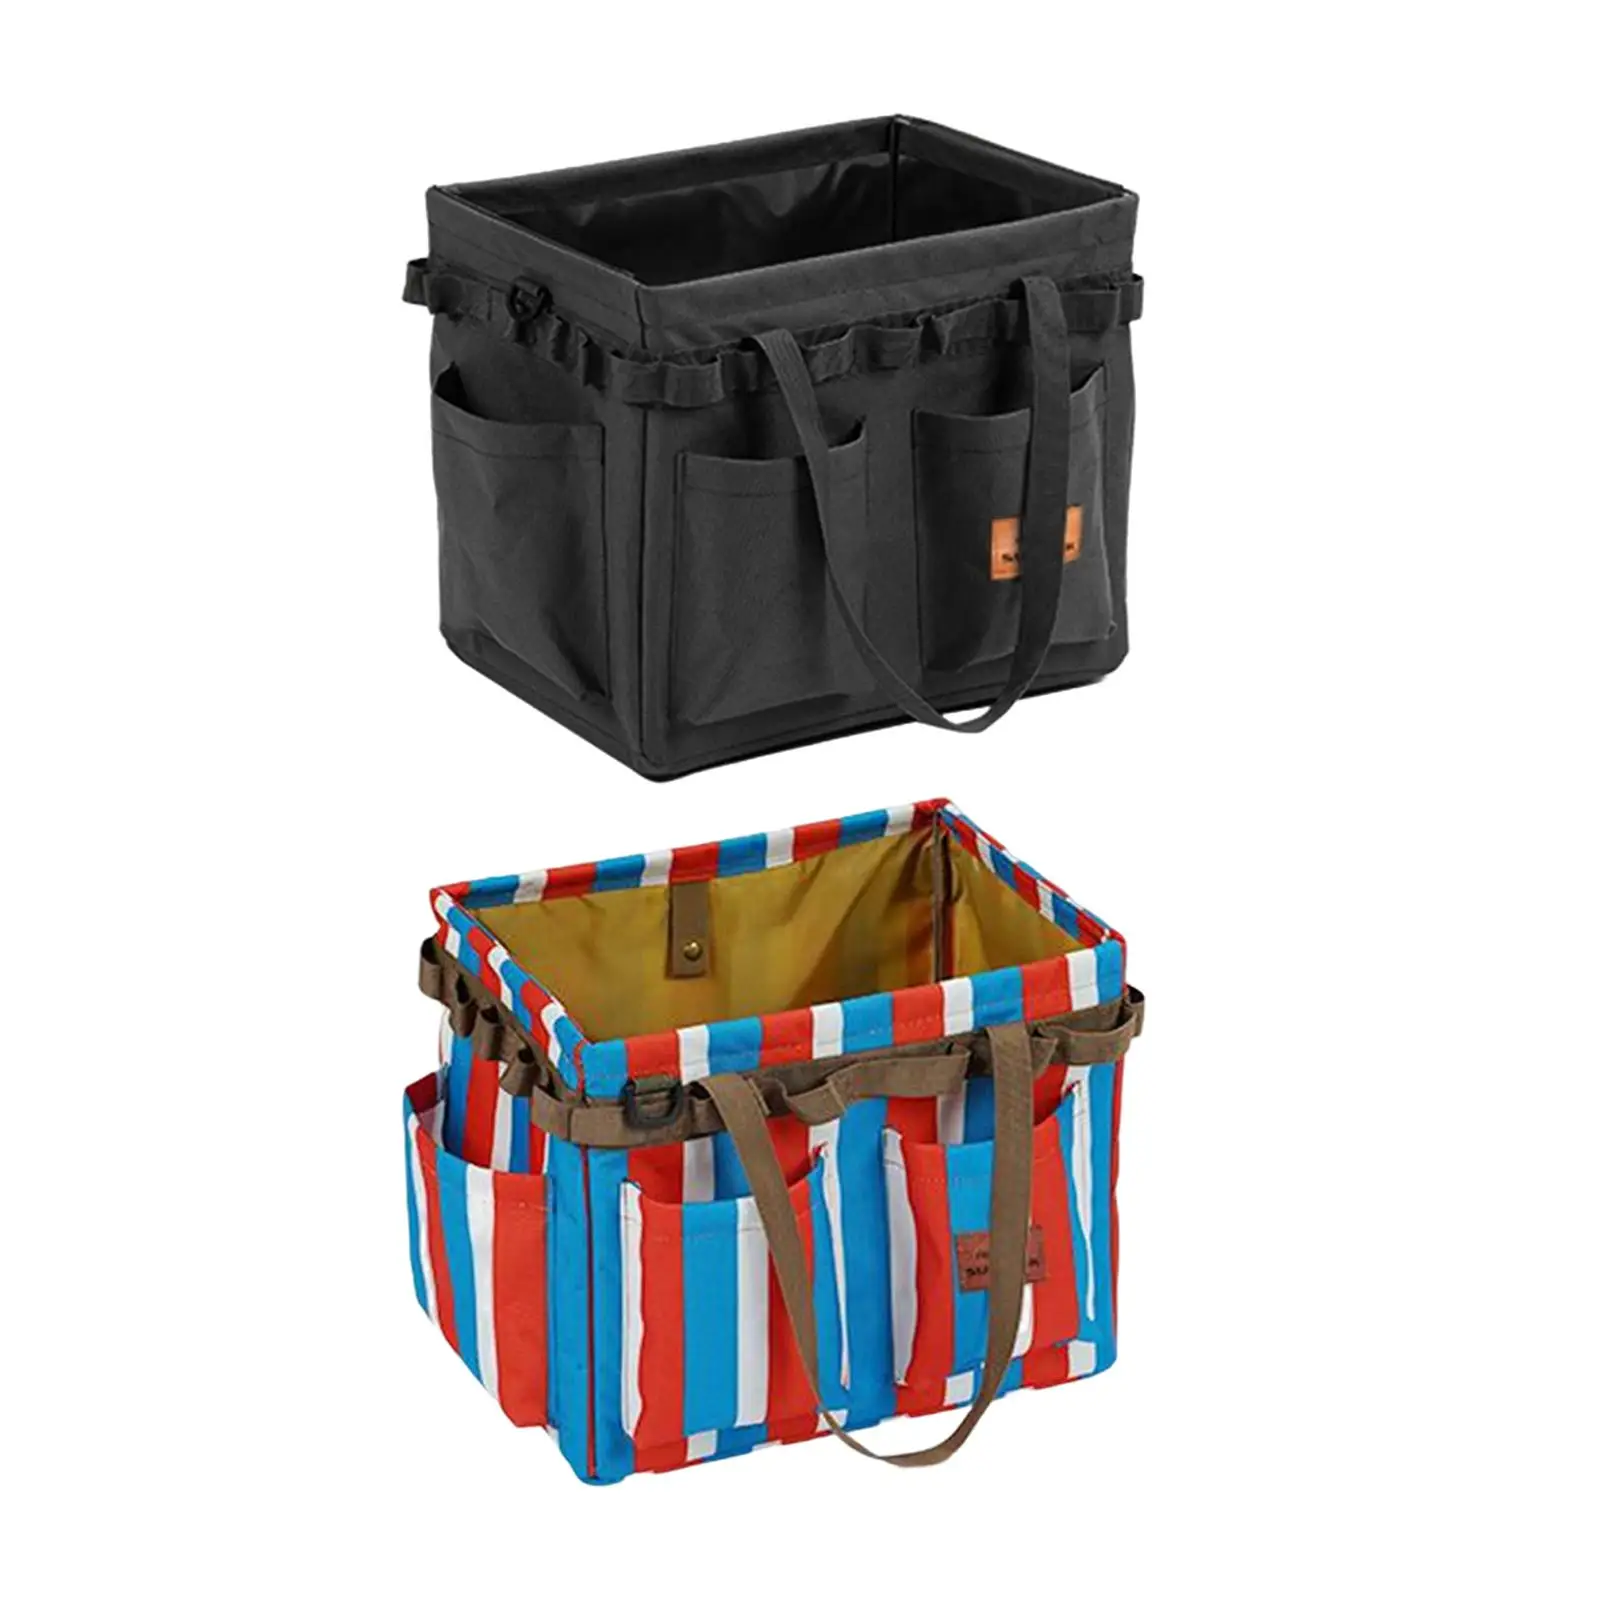 Utility Tote Tool Organizer Household Outdoor Basket BBQ Camping Storage Bag